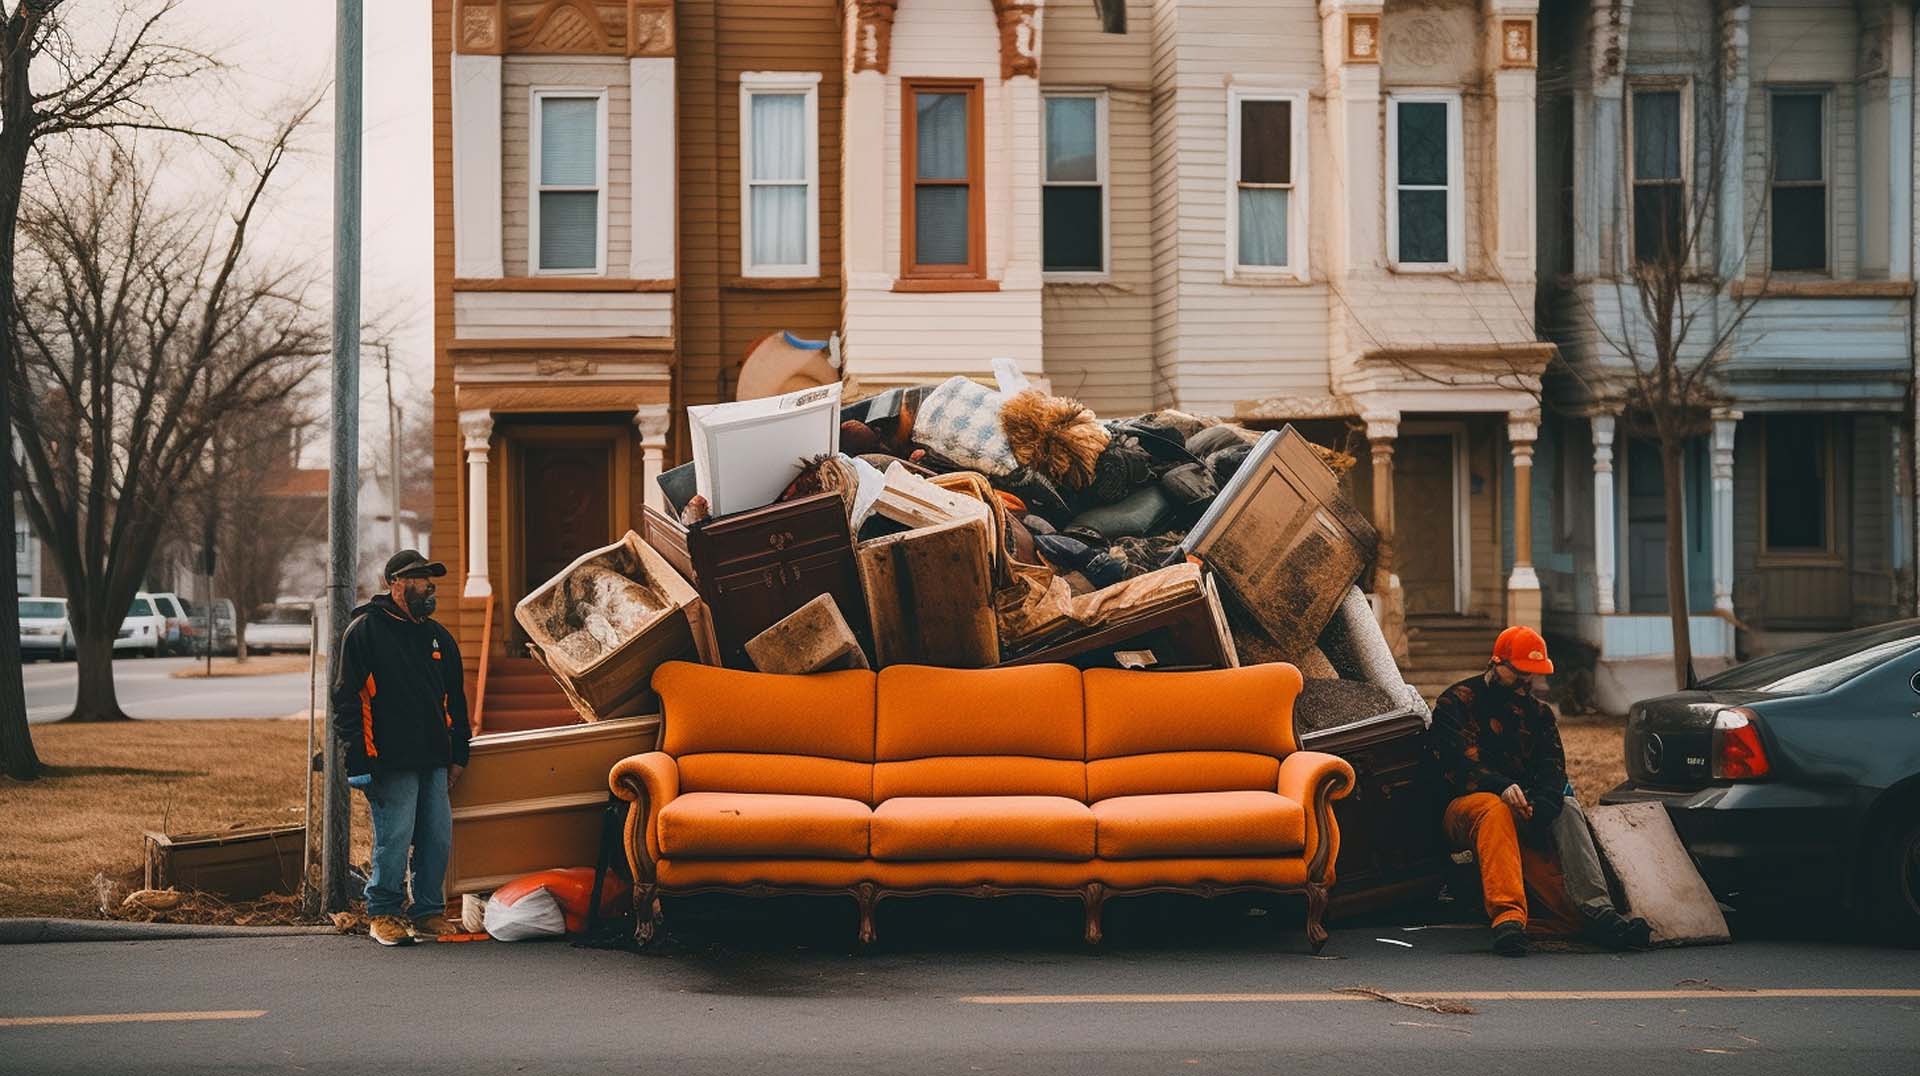 Residential Junk Removal Services in Val-d'Or